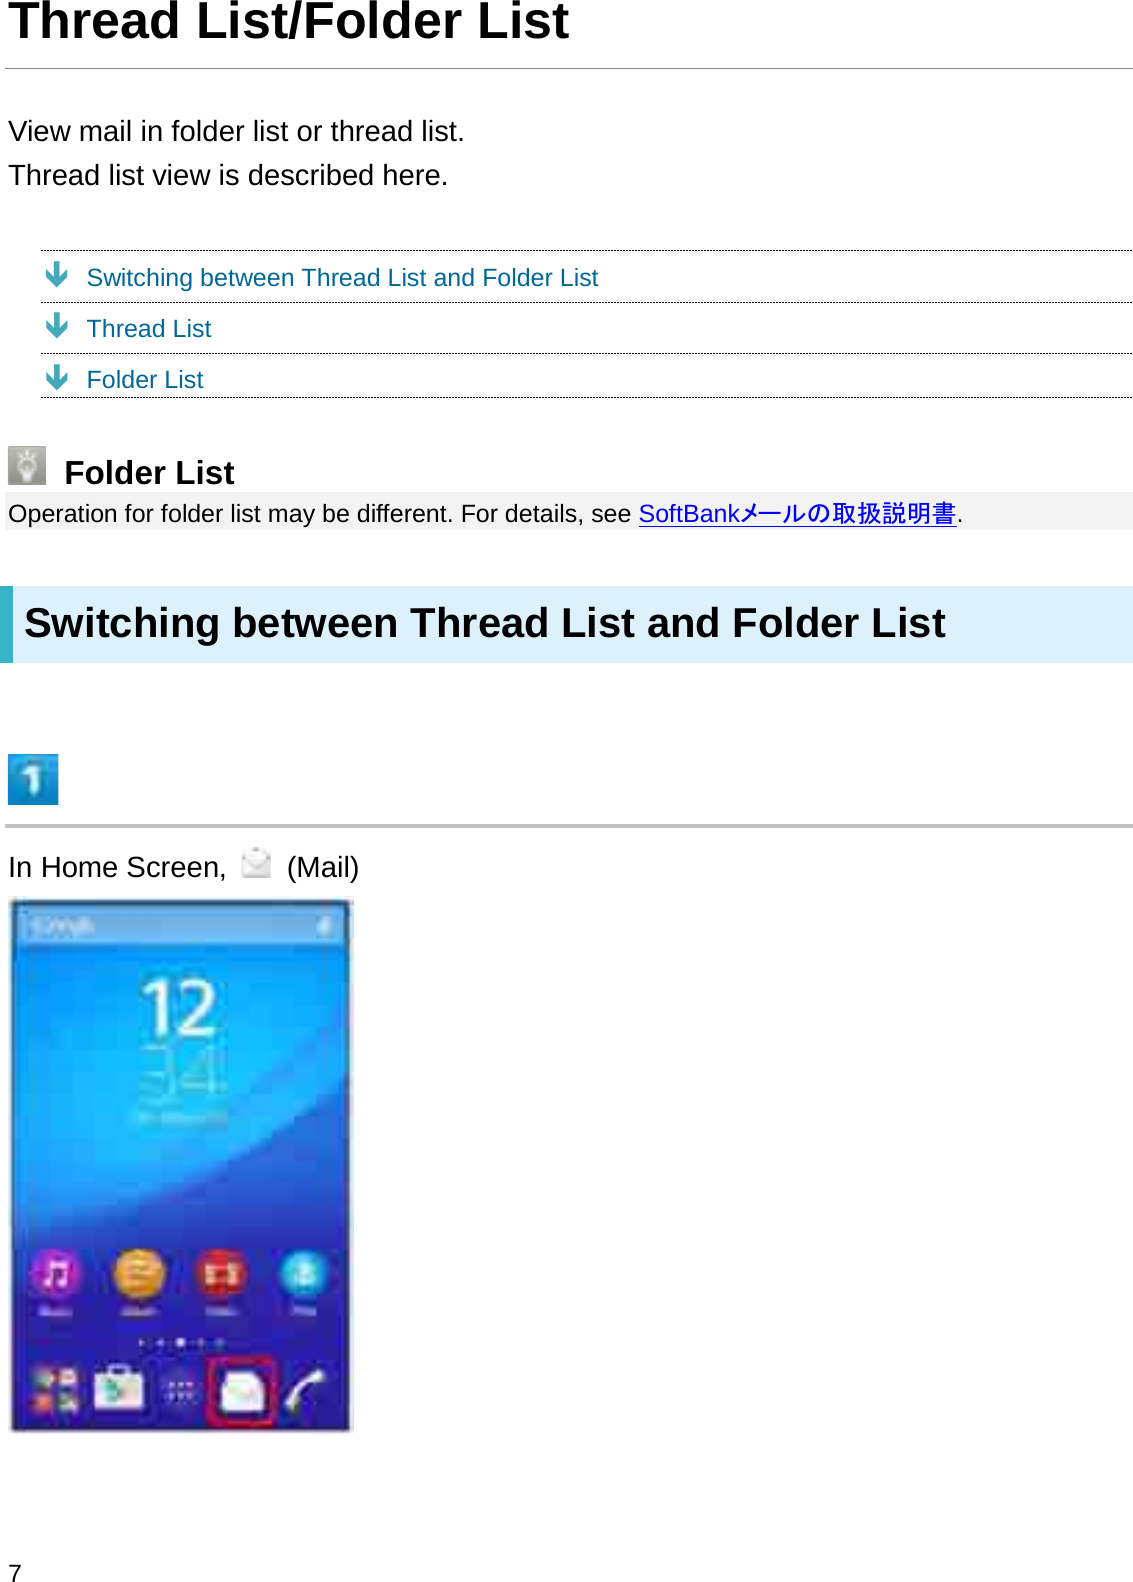 Thread List/Folder ListView mail in folder list or thread list. Thread list view is described here.ÐSwitching between Thread List and Folder ListÐThread ListÐFolder ListFolder ListOperation for folder list may be different. For details, see SoftBank䝯䞊䝹䛾ྲྀᢅㄝ᫂᭩.Switching between Thread List and Folder ListIn Home Screen,  (Mail)7